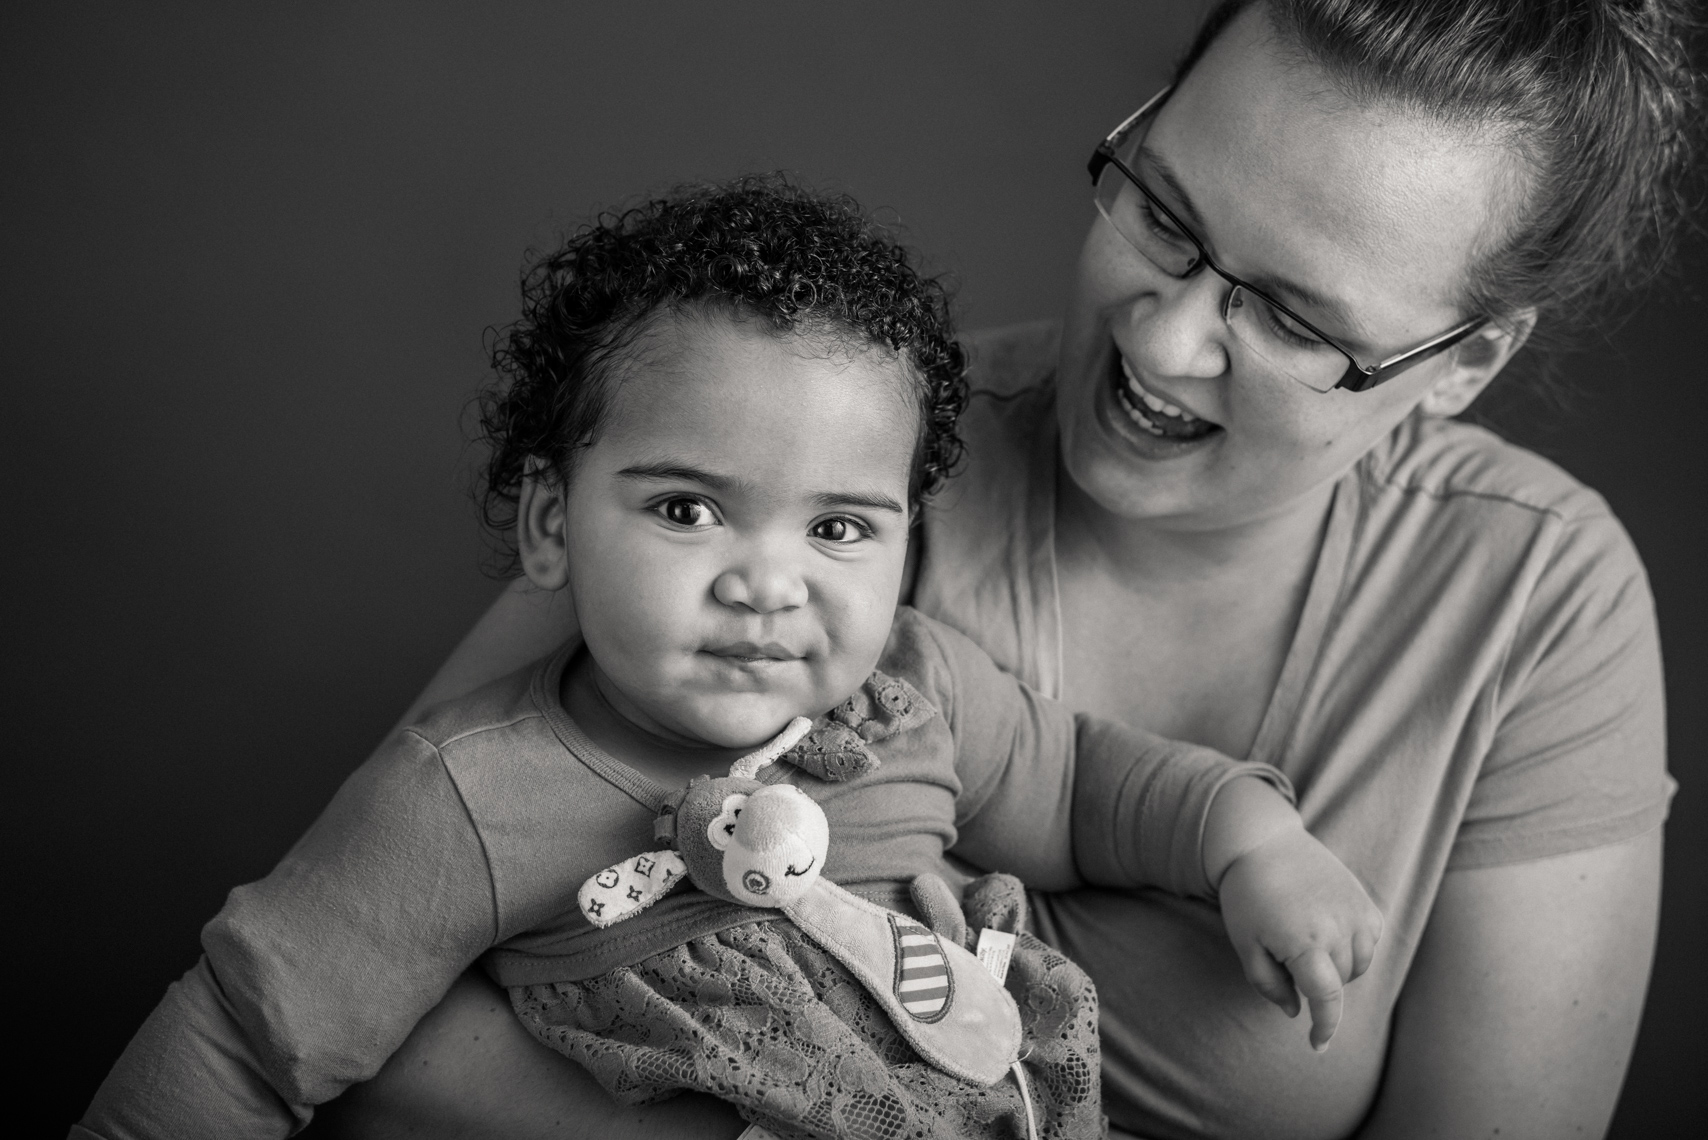 Flashes of Hope, portrait of a young mother with her daughter who is fighting cancer. Nashville, Louisville, Chicago, non-profit, documentary, portrait, photographer.